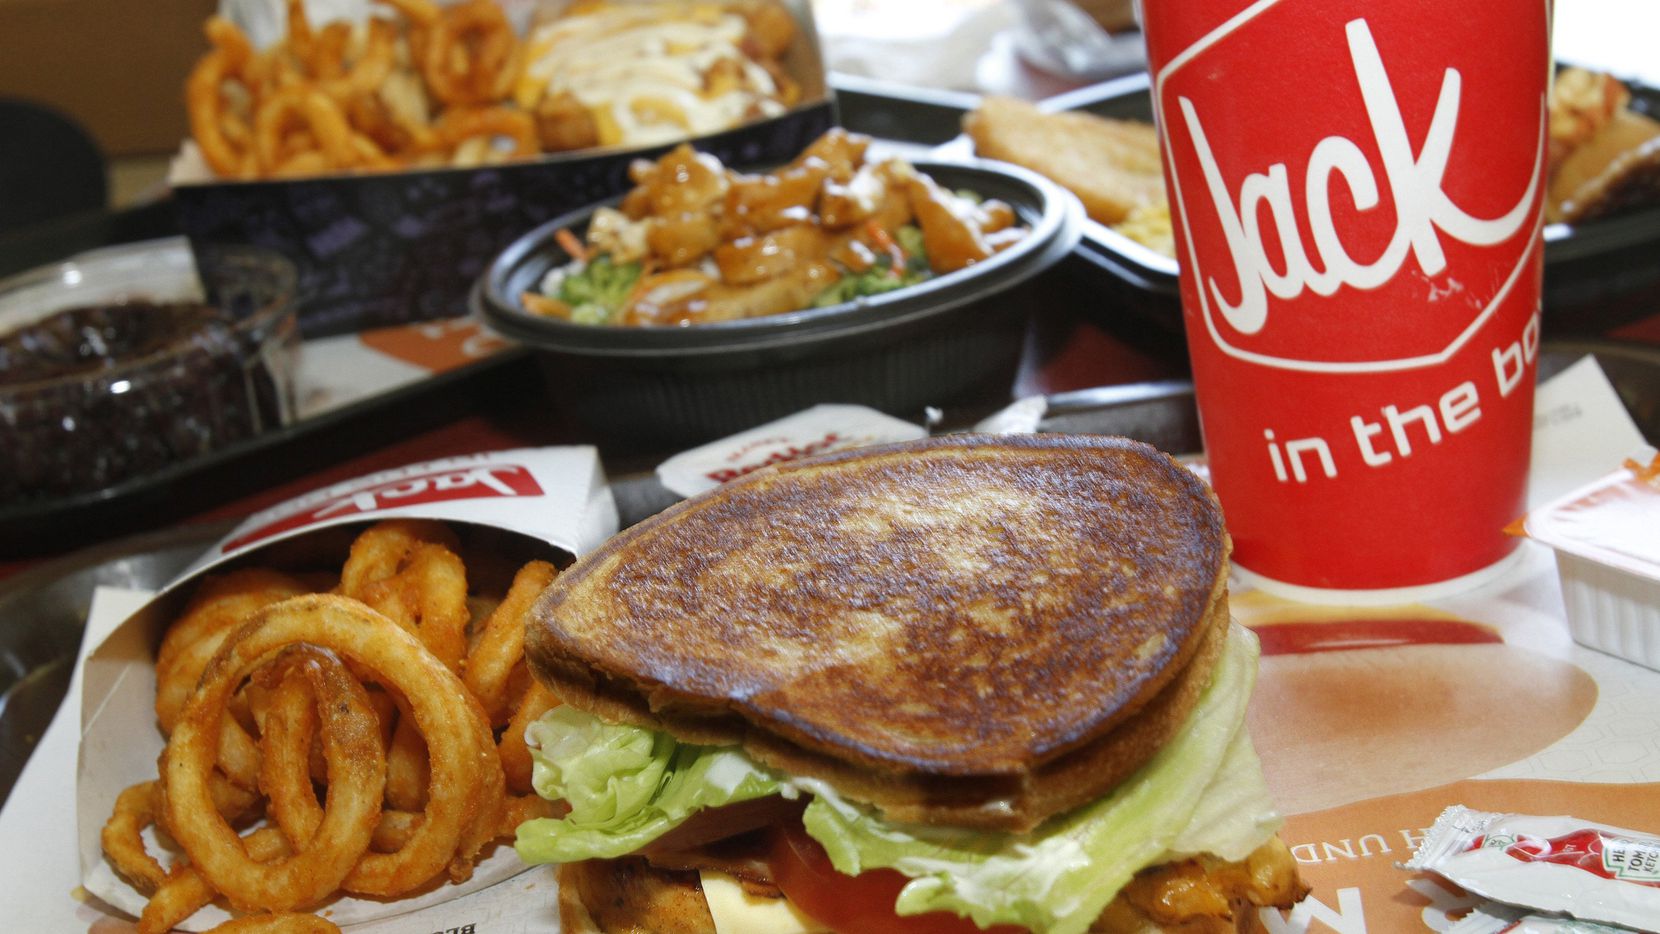 Jack In The Box Cooks Up Late Night Munchie Meal Menu Amid